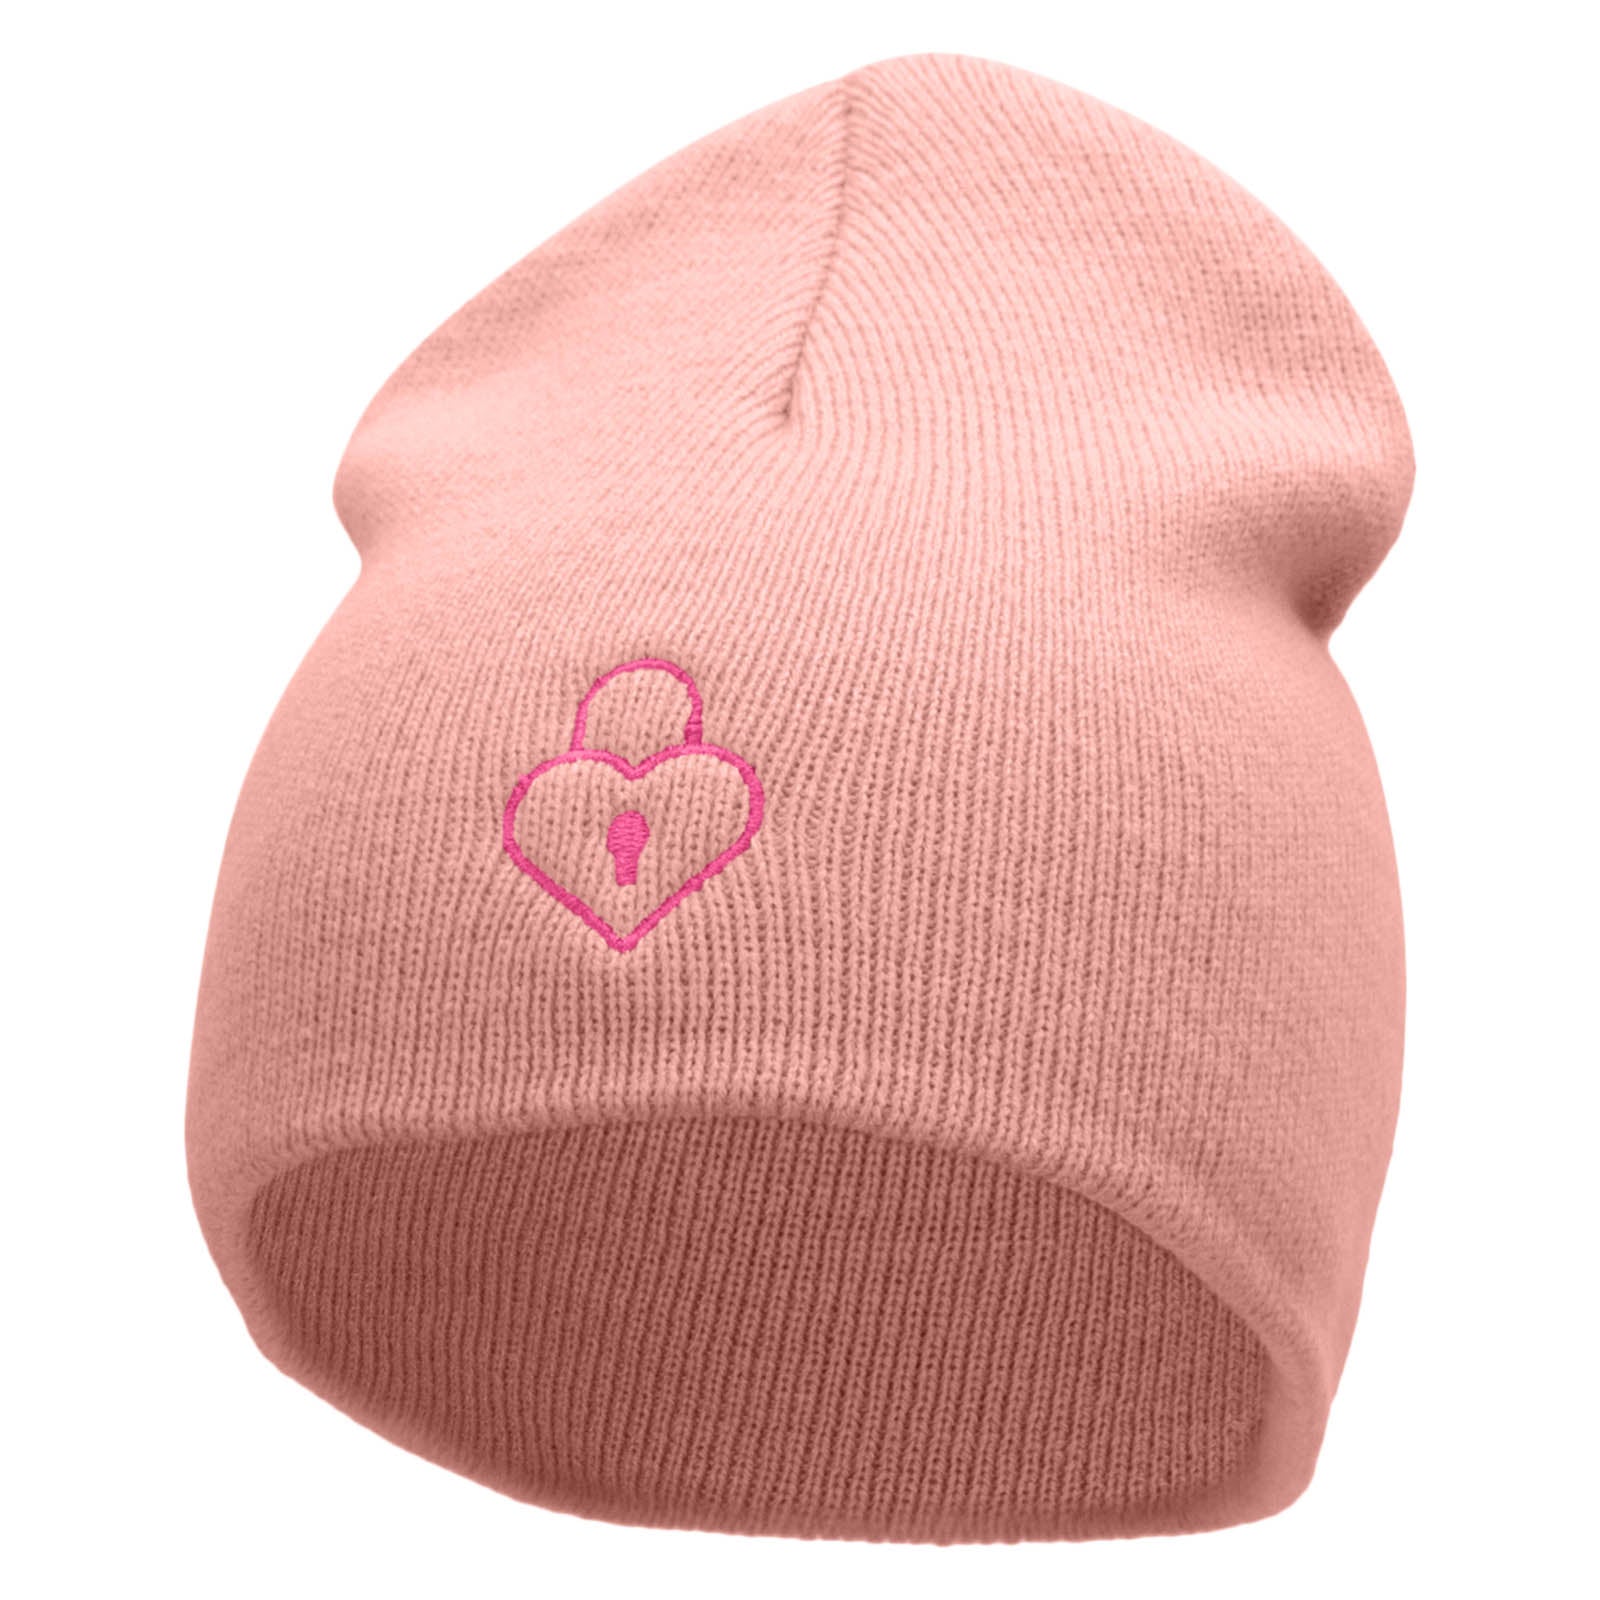 Lock Of Love Embroidered 8 Inch Short Beanie Made in USA - Pink OSFM